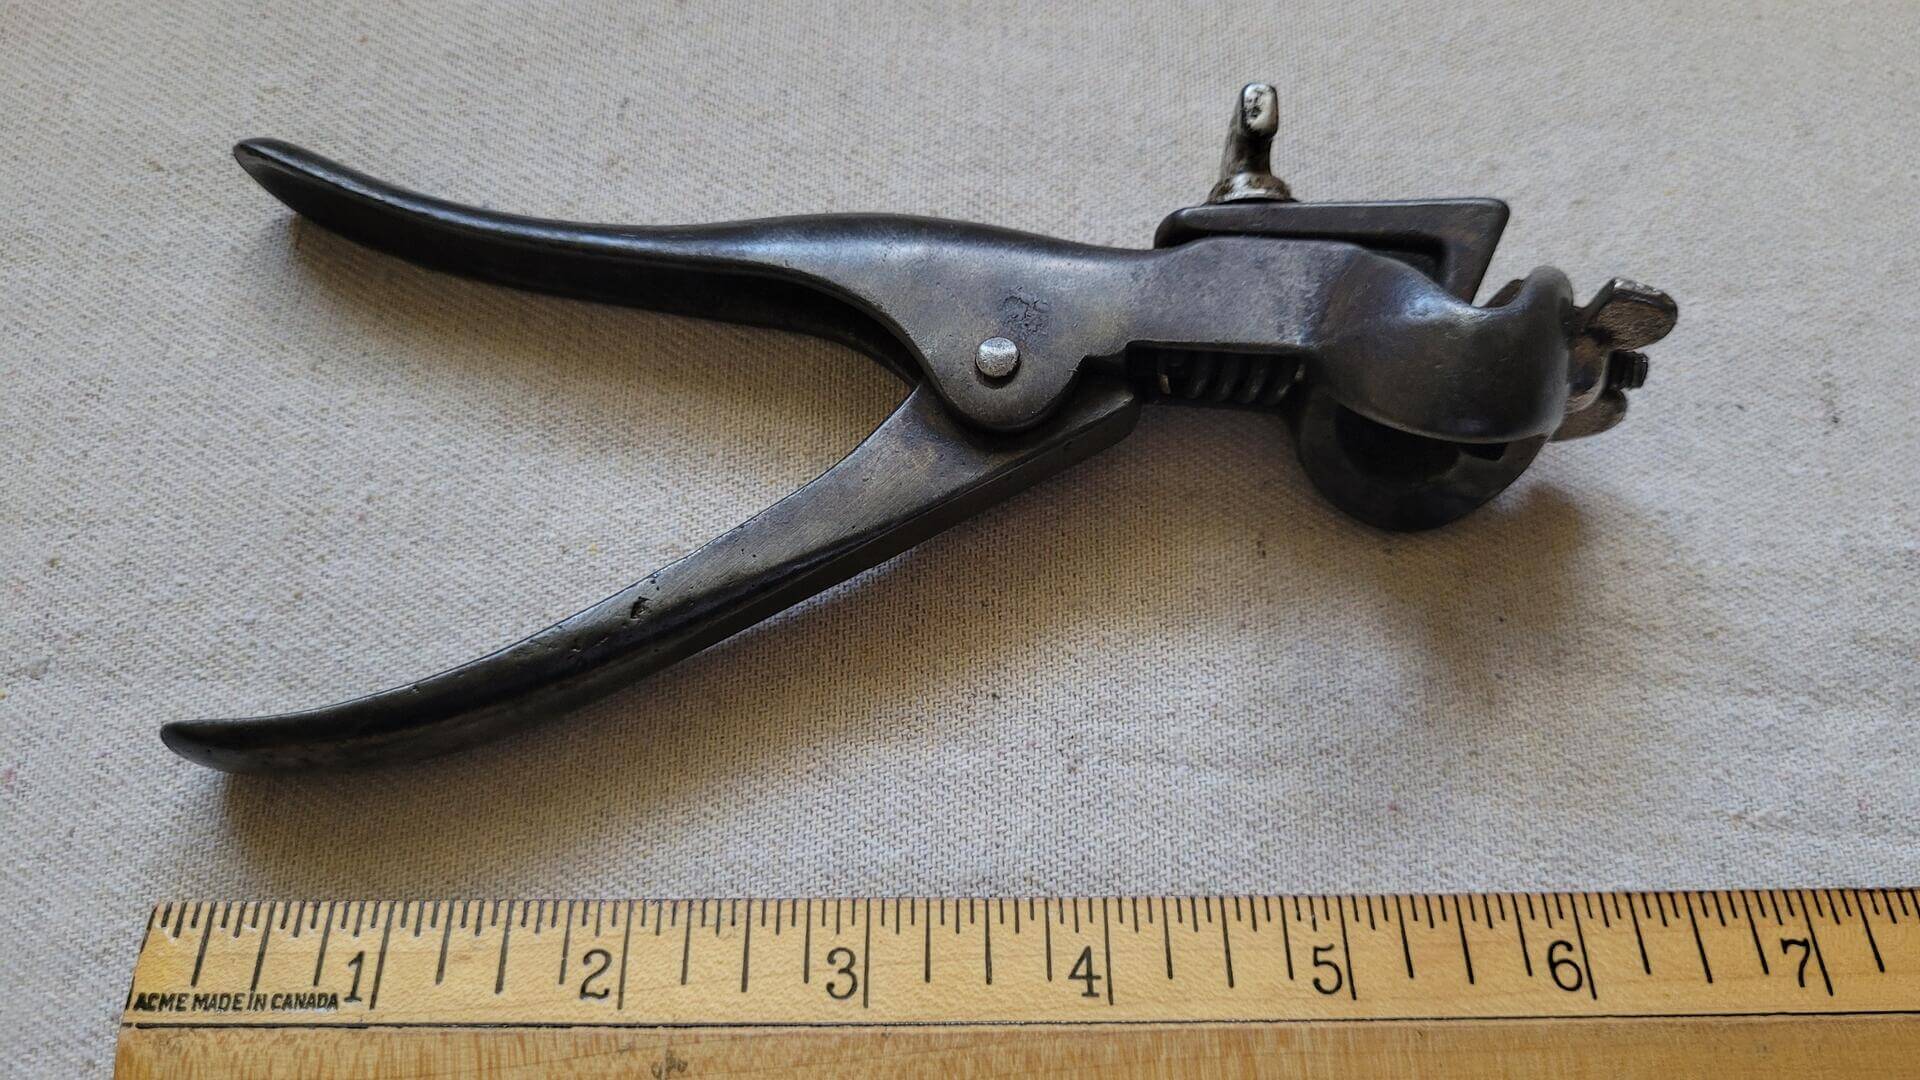 Nice vintage woodworking and carpentry cast iron adjustable hand saw set pliers used to set distance the saw tooth is bent away from the saw blade. The magnitude of set determines the cut width and prevents the blade of the saw from binding in the wood.